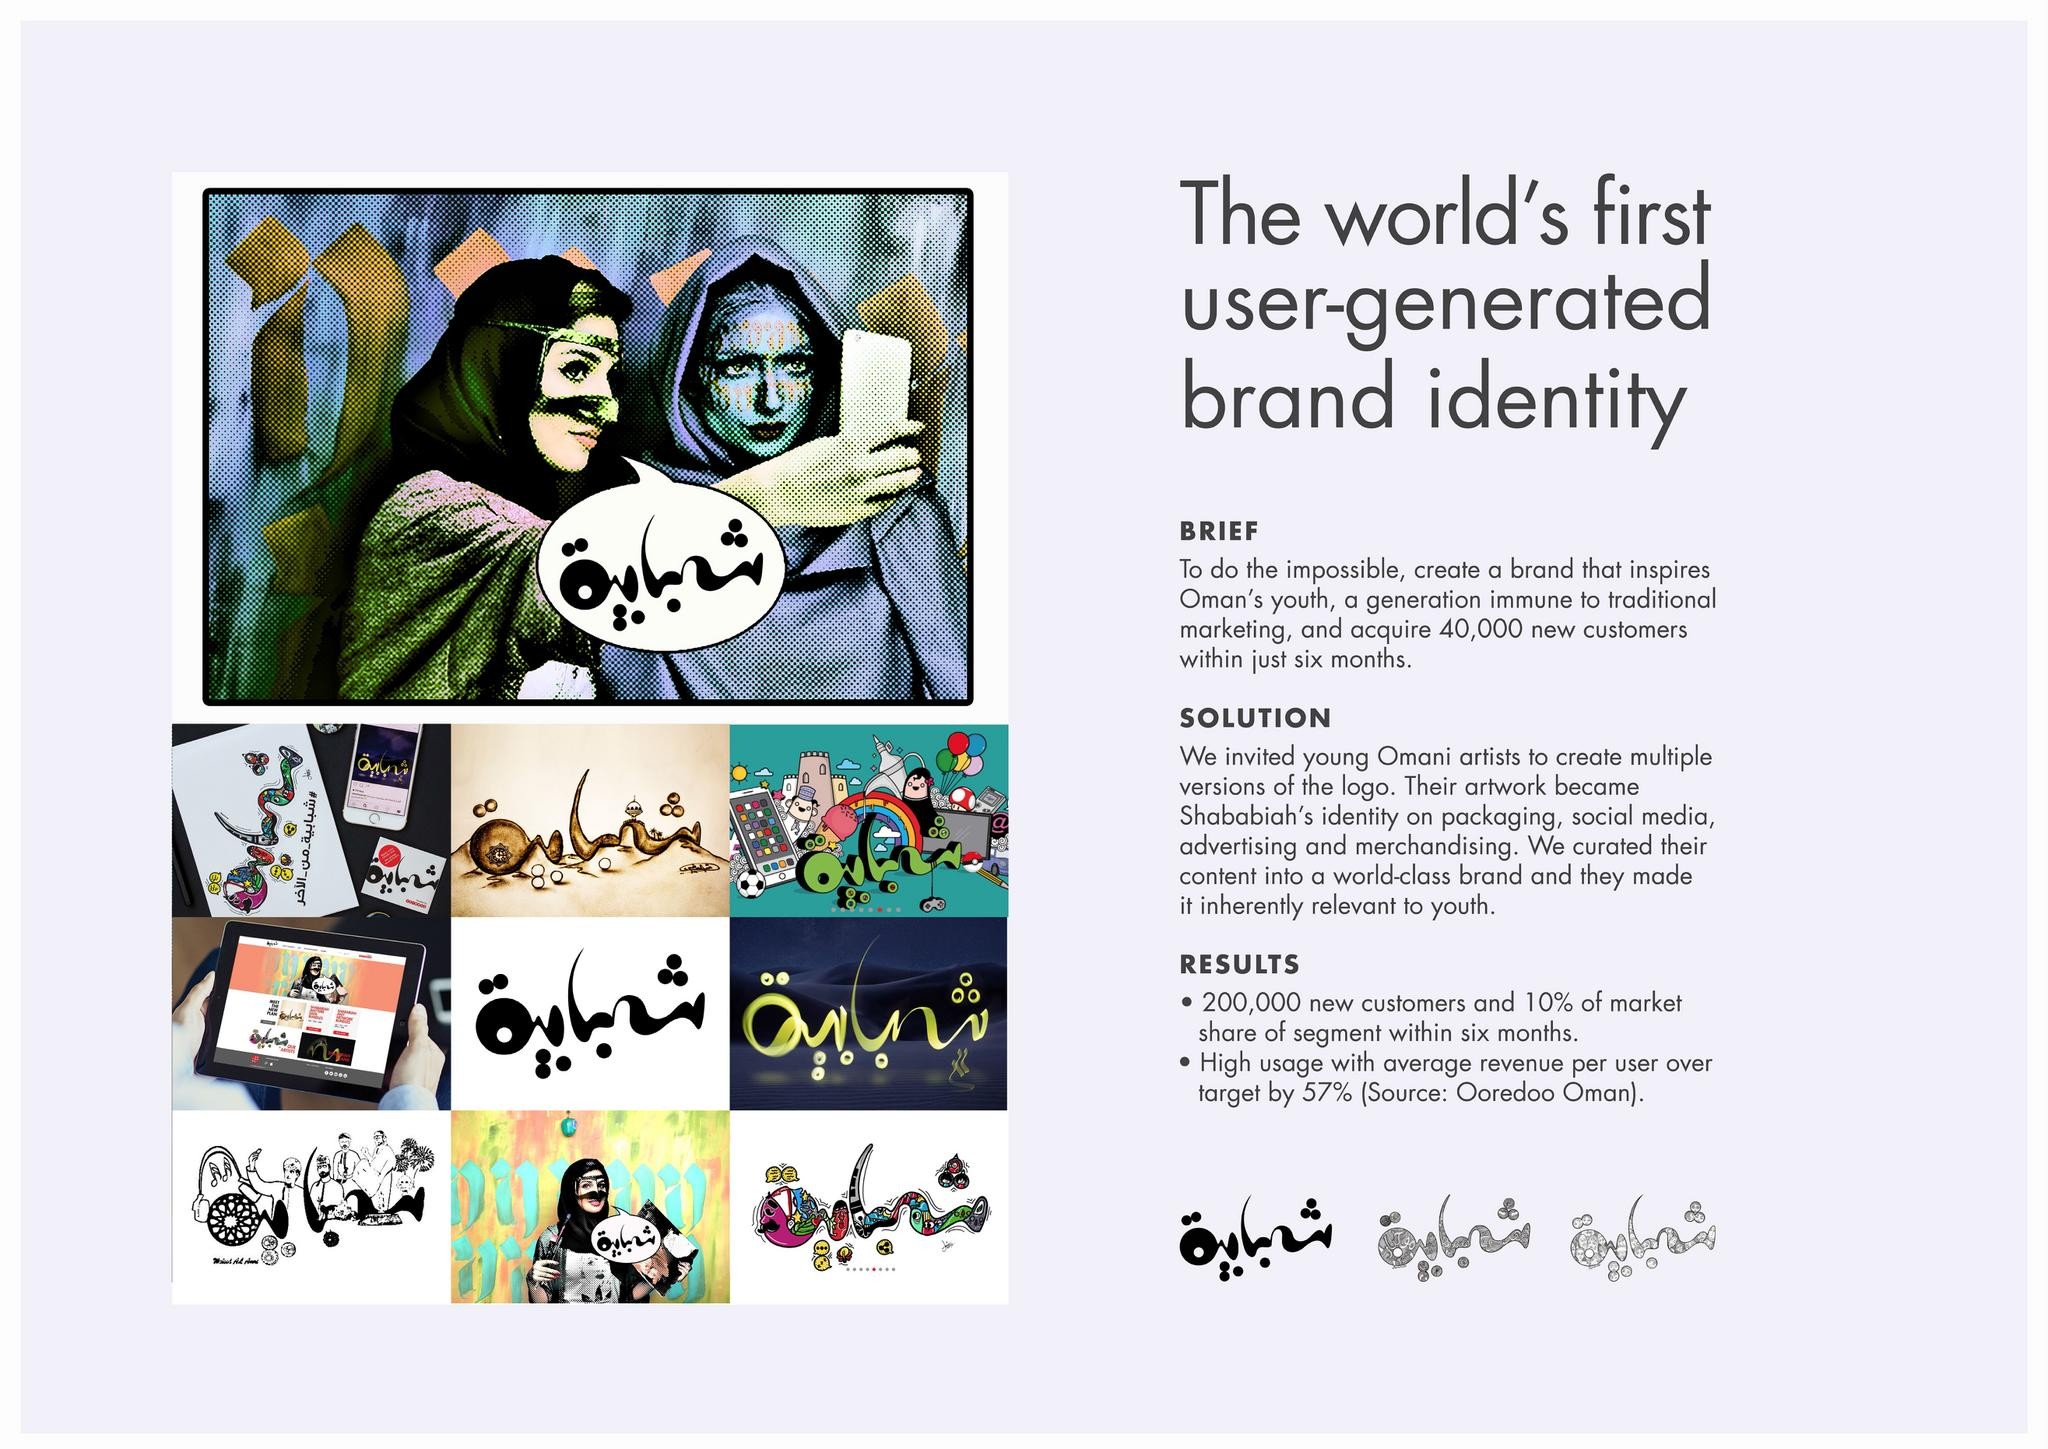 THE WORLDS FIRST USER-GENERATED BRAND IDENTITY